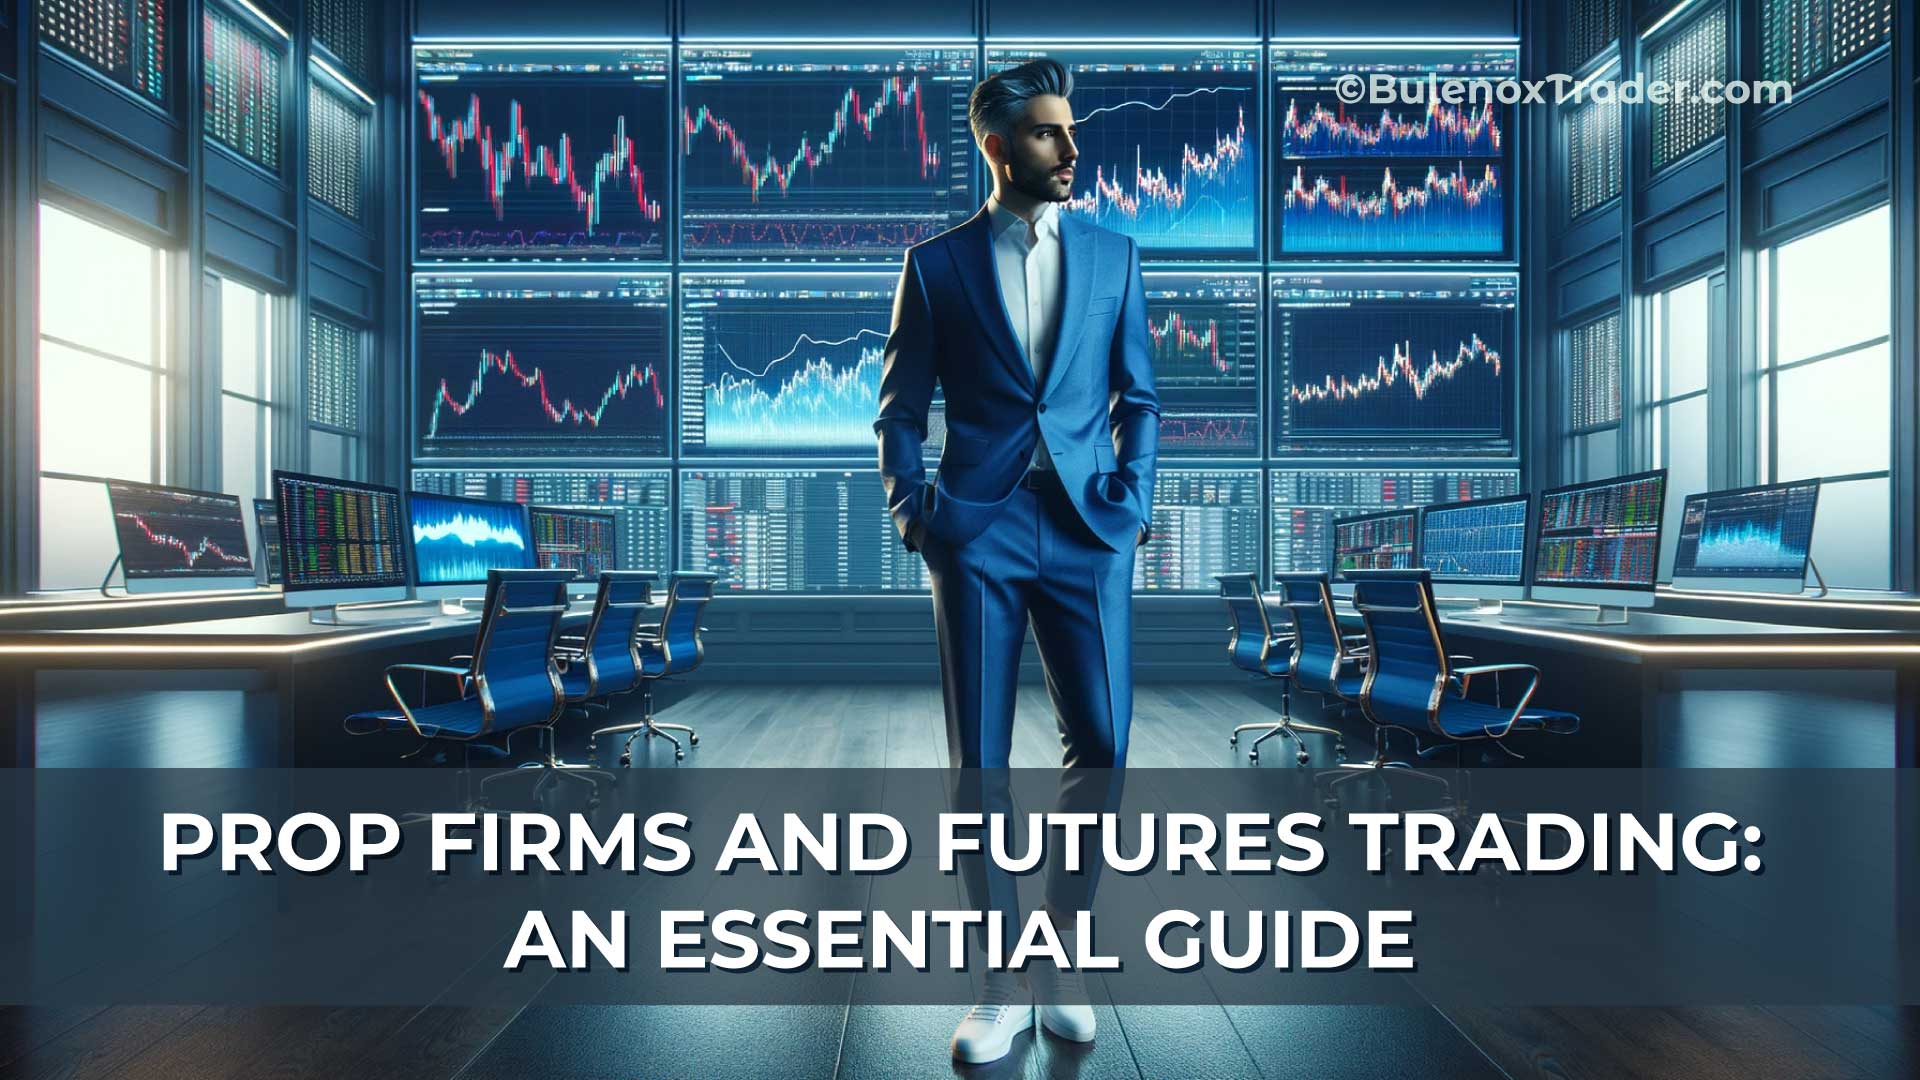 Prop-Firms-and-Futures-Trading-A-Comprehensive-Guide-on-Bulenox-Trader-Website